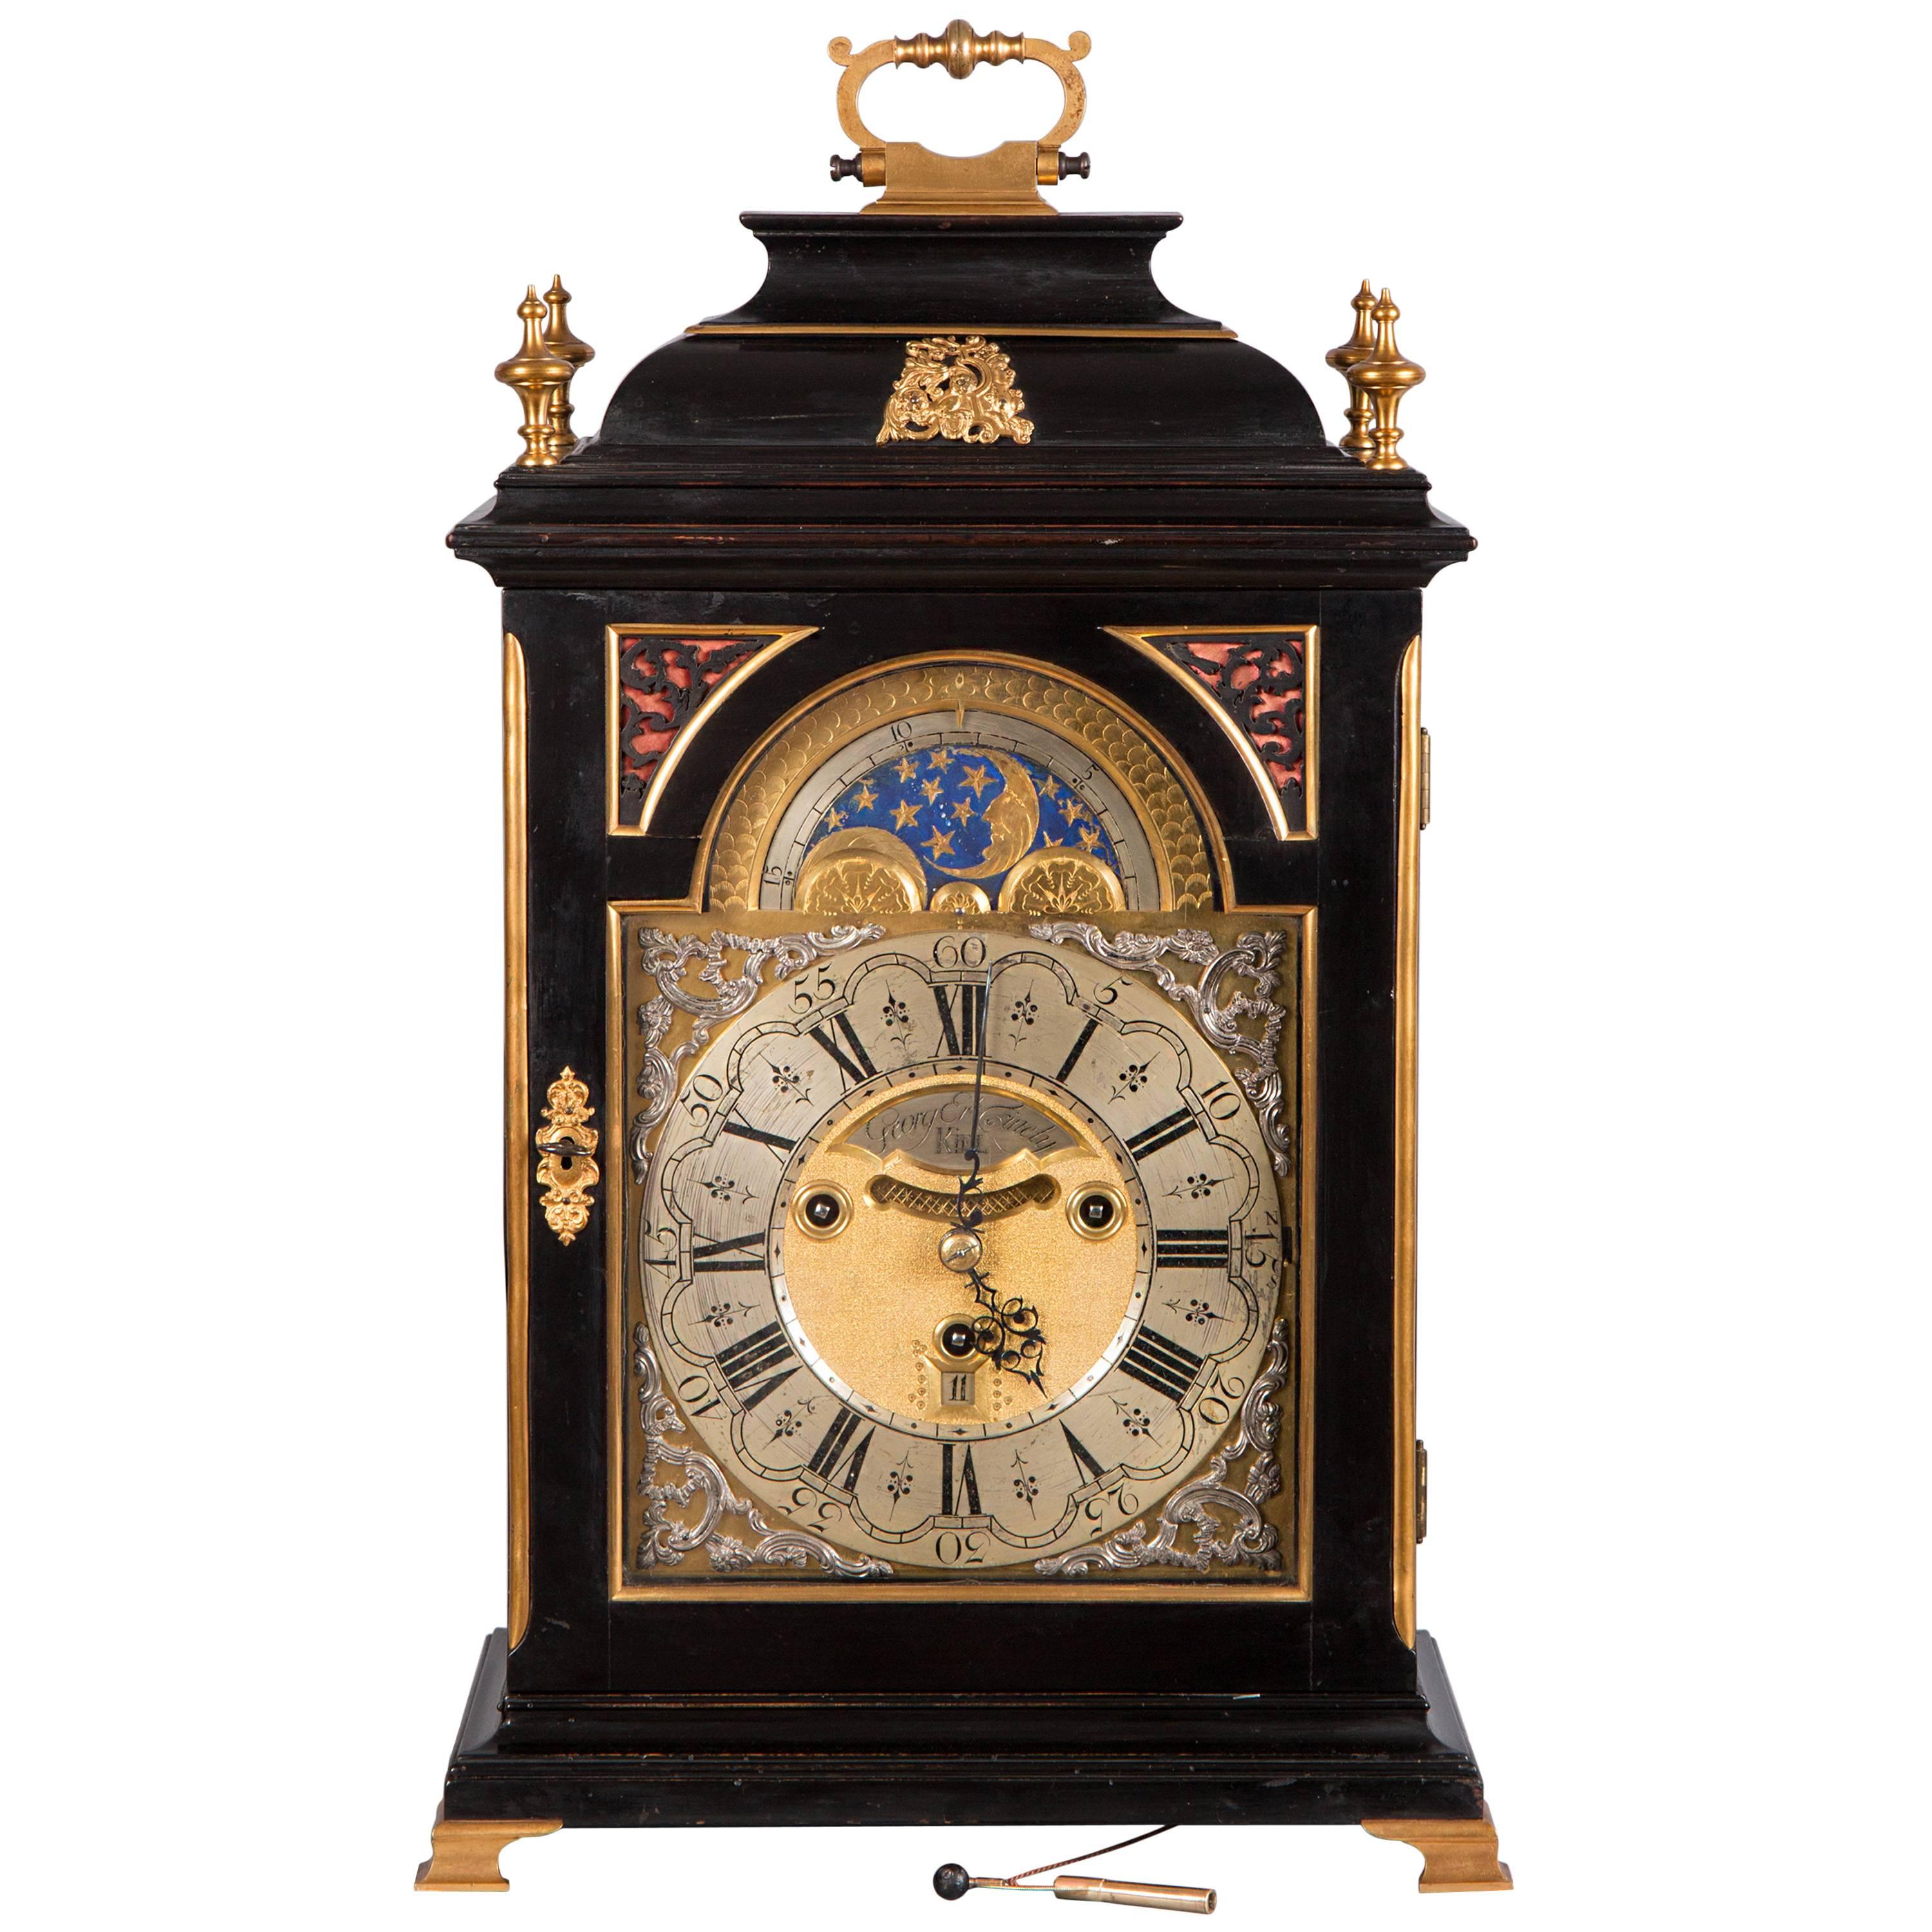 Baroque Mantel Clock with Chimes by Georg Erh. Finely, Germany, circa 1740